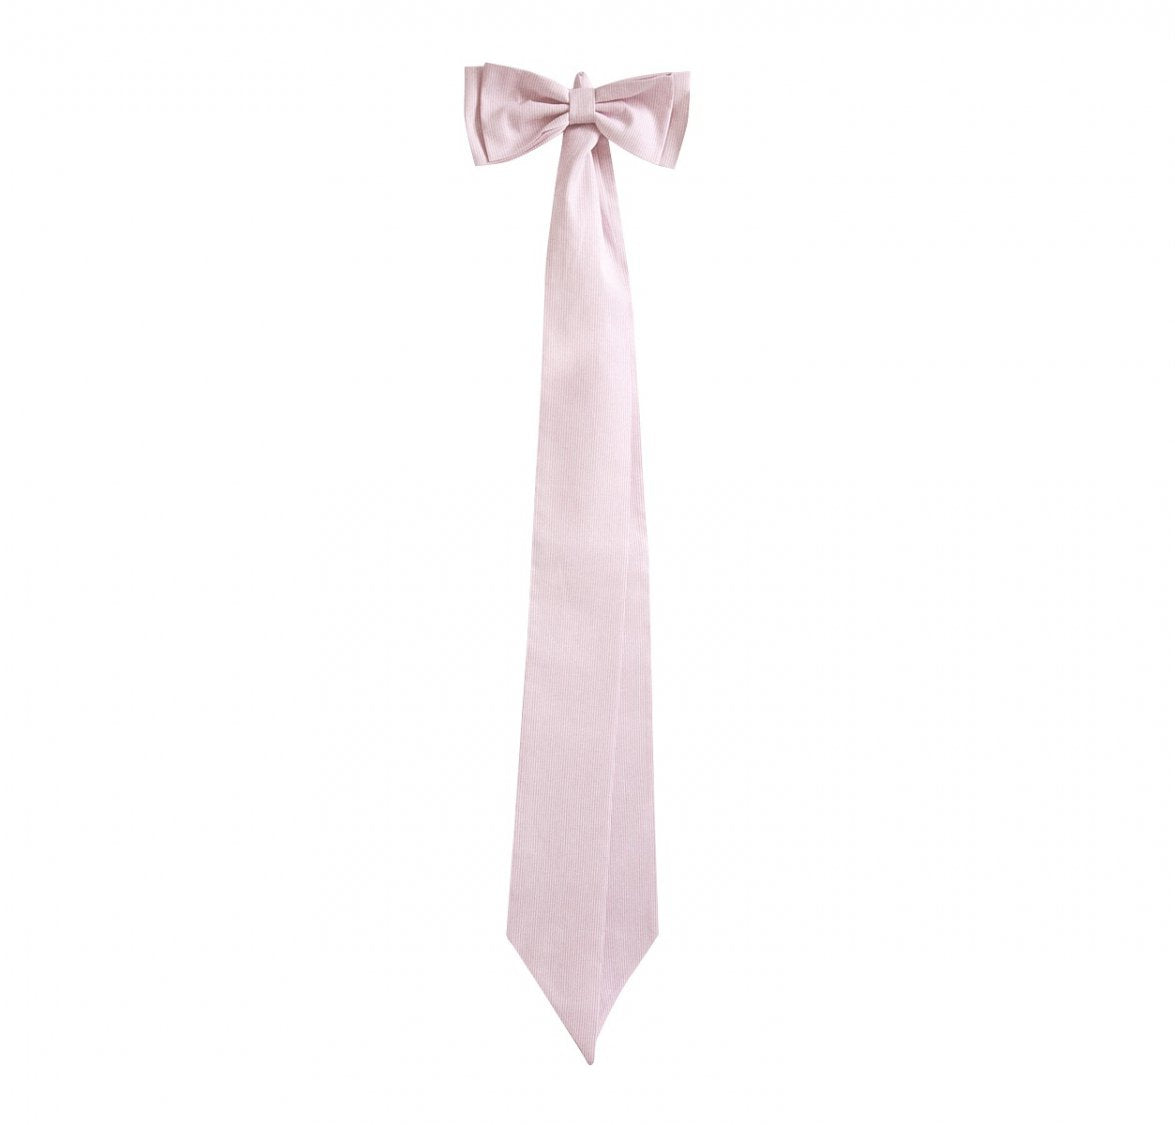 Decorative Baby Pink Bow